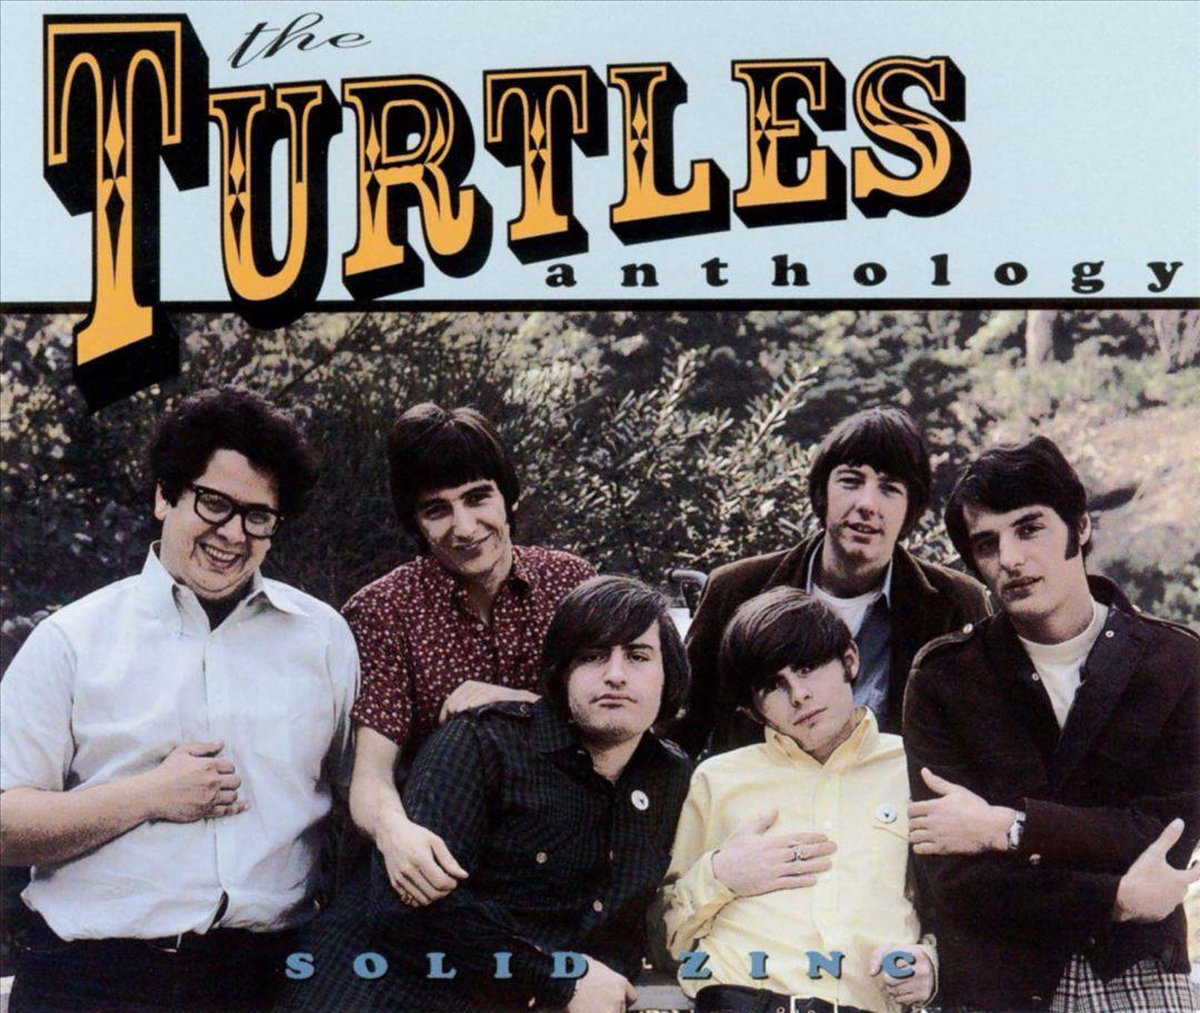 Classic Album Review: The Turtles  Solid Zinc: Anthology - Tinnitist